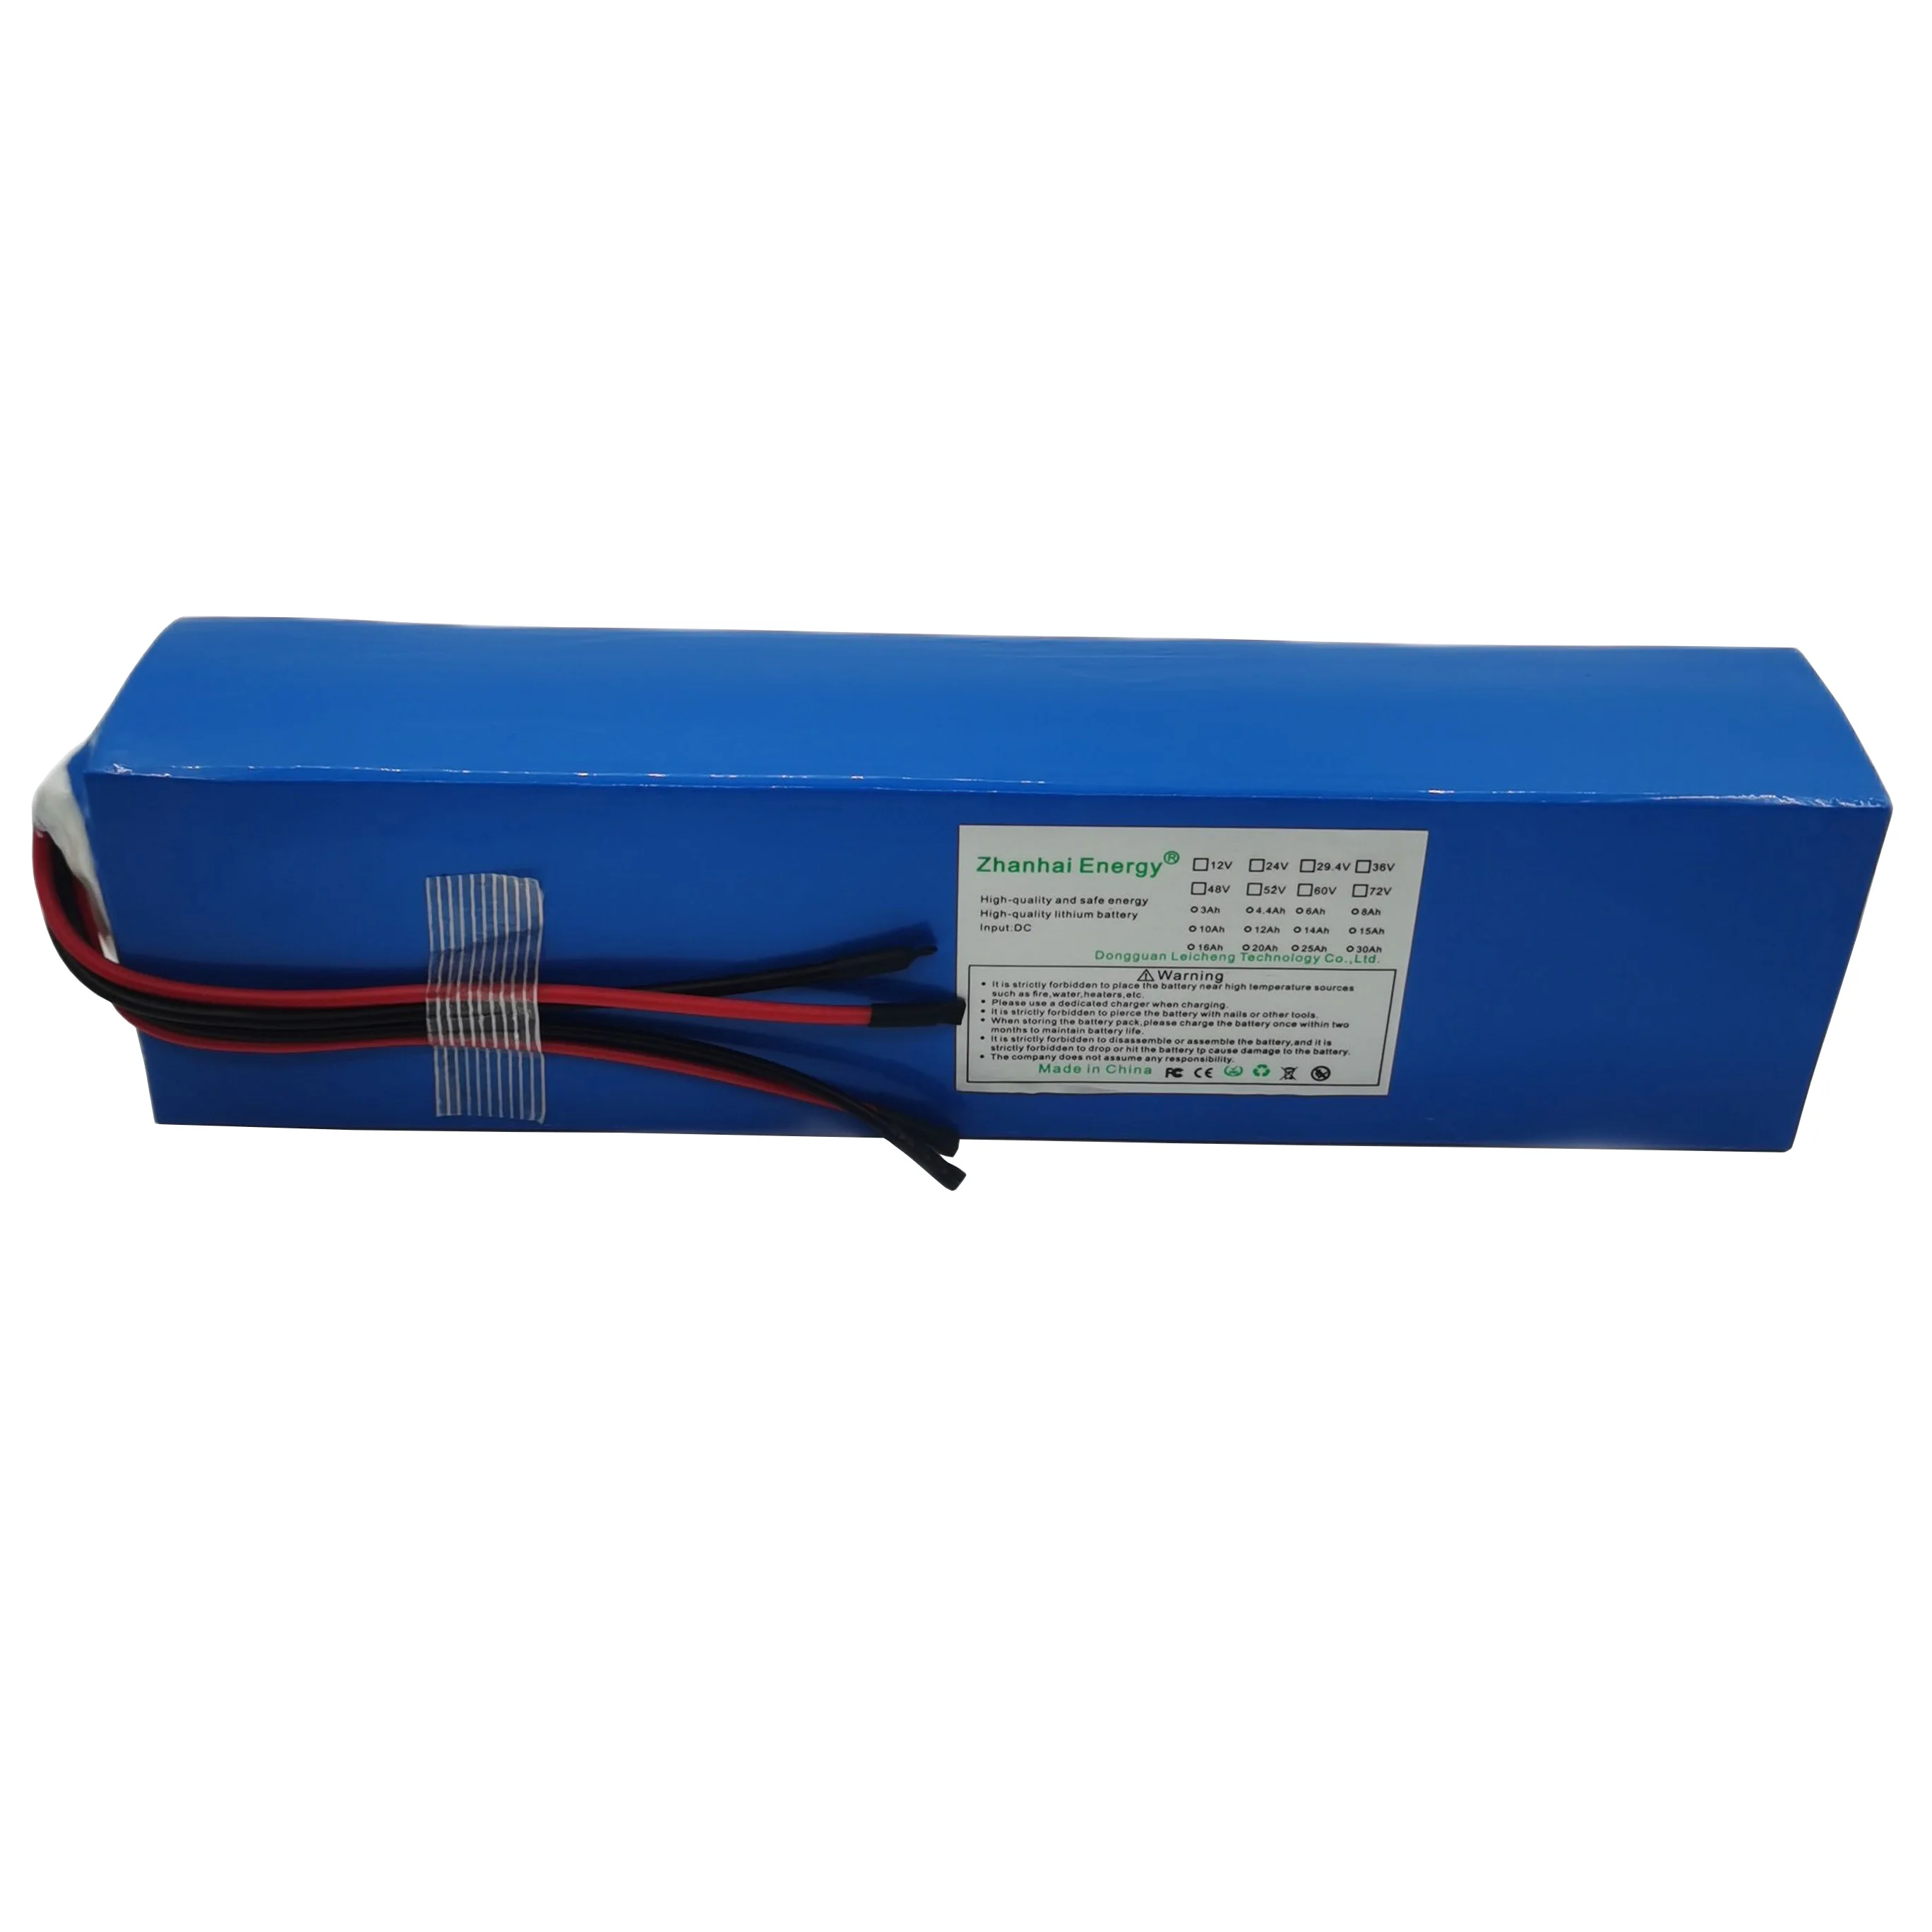 

24V 29.4V 18Ah 16Ah 15Ah 13Ah 18650 Li-ion Rechargeable Battery Pack 7S 5P For Below 750W Golf Scooters Bicycles Customizable